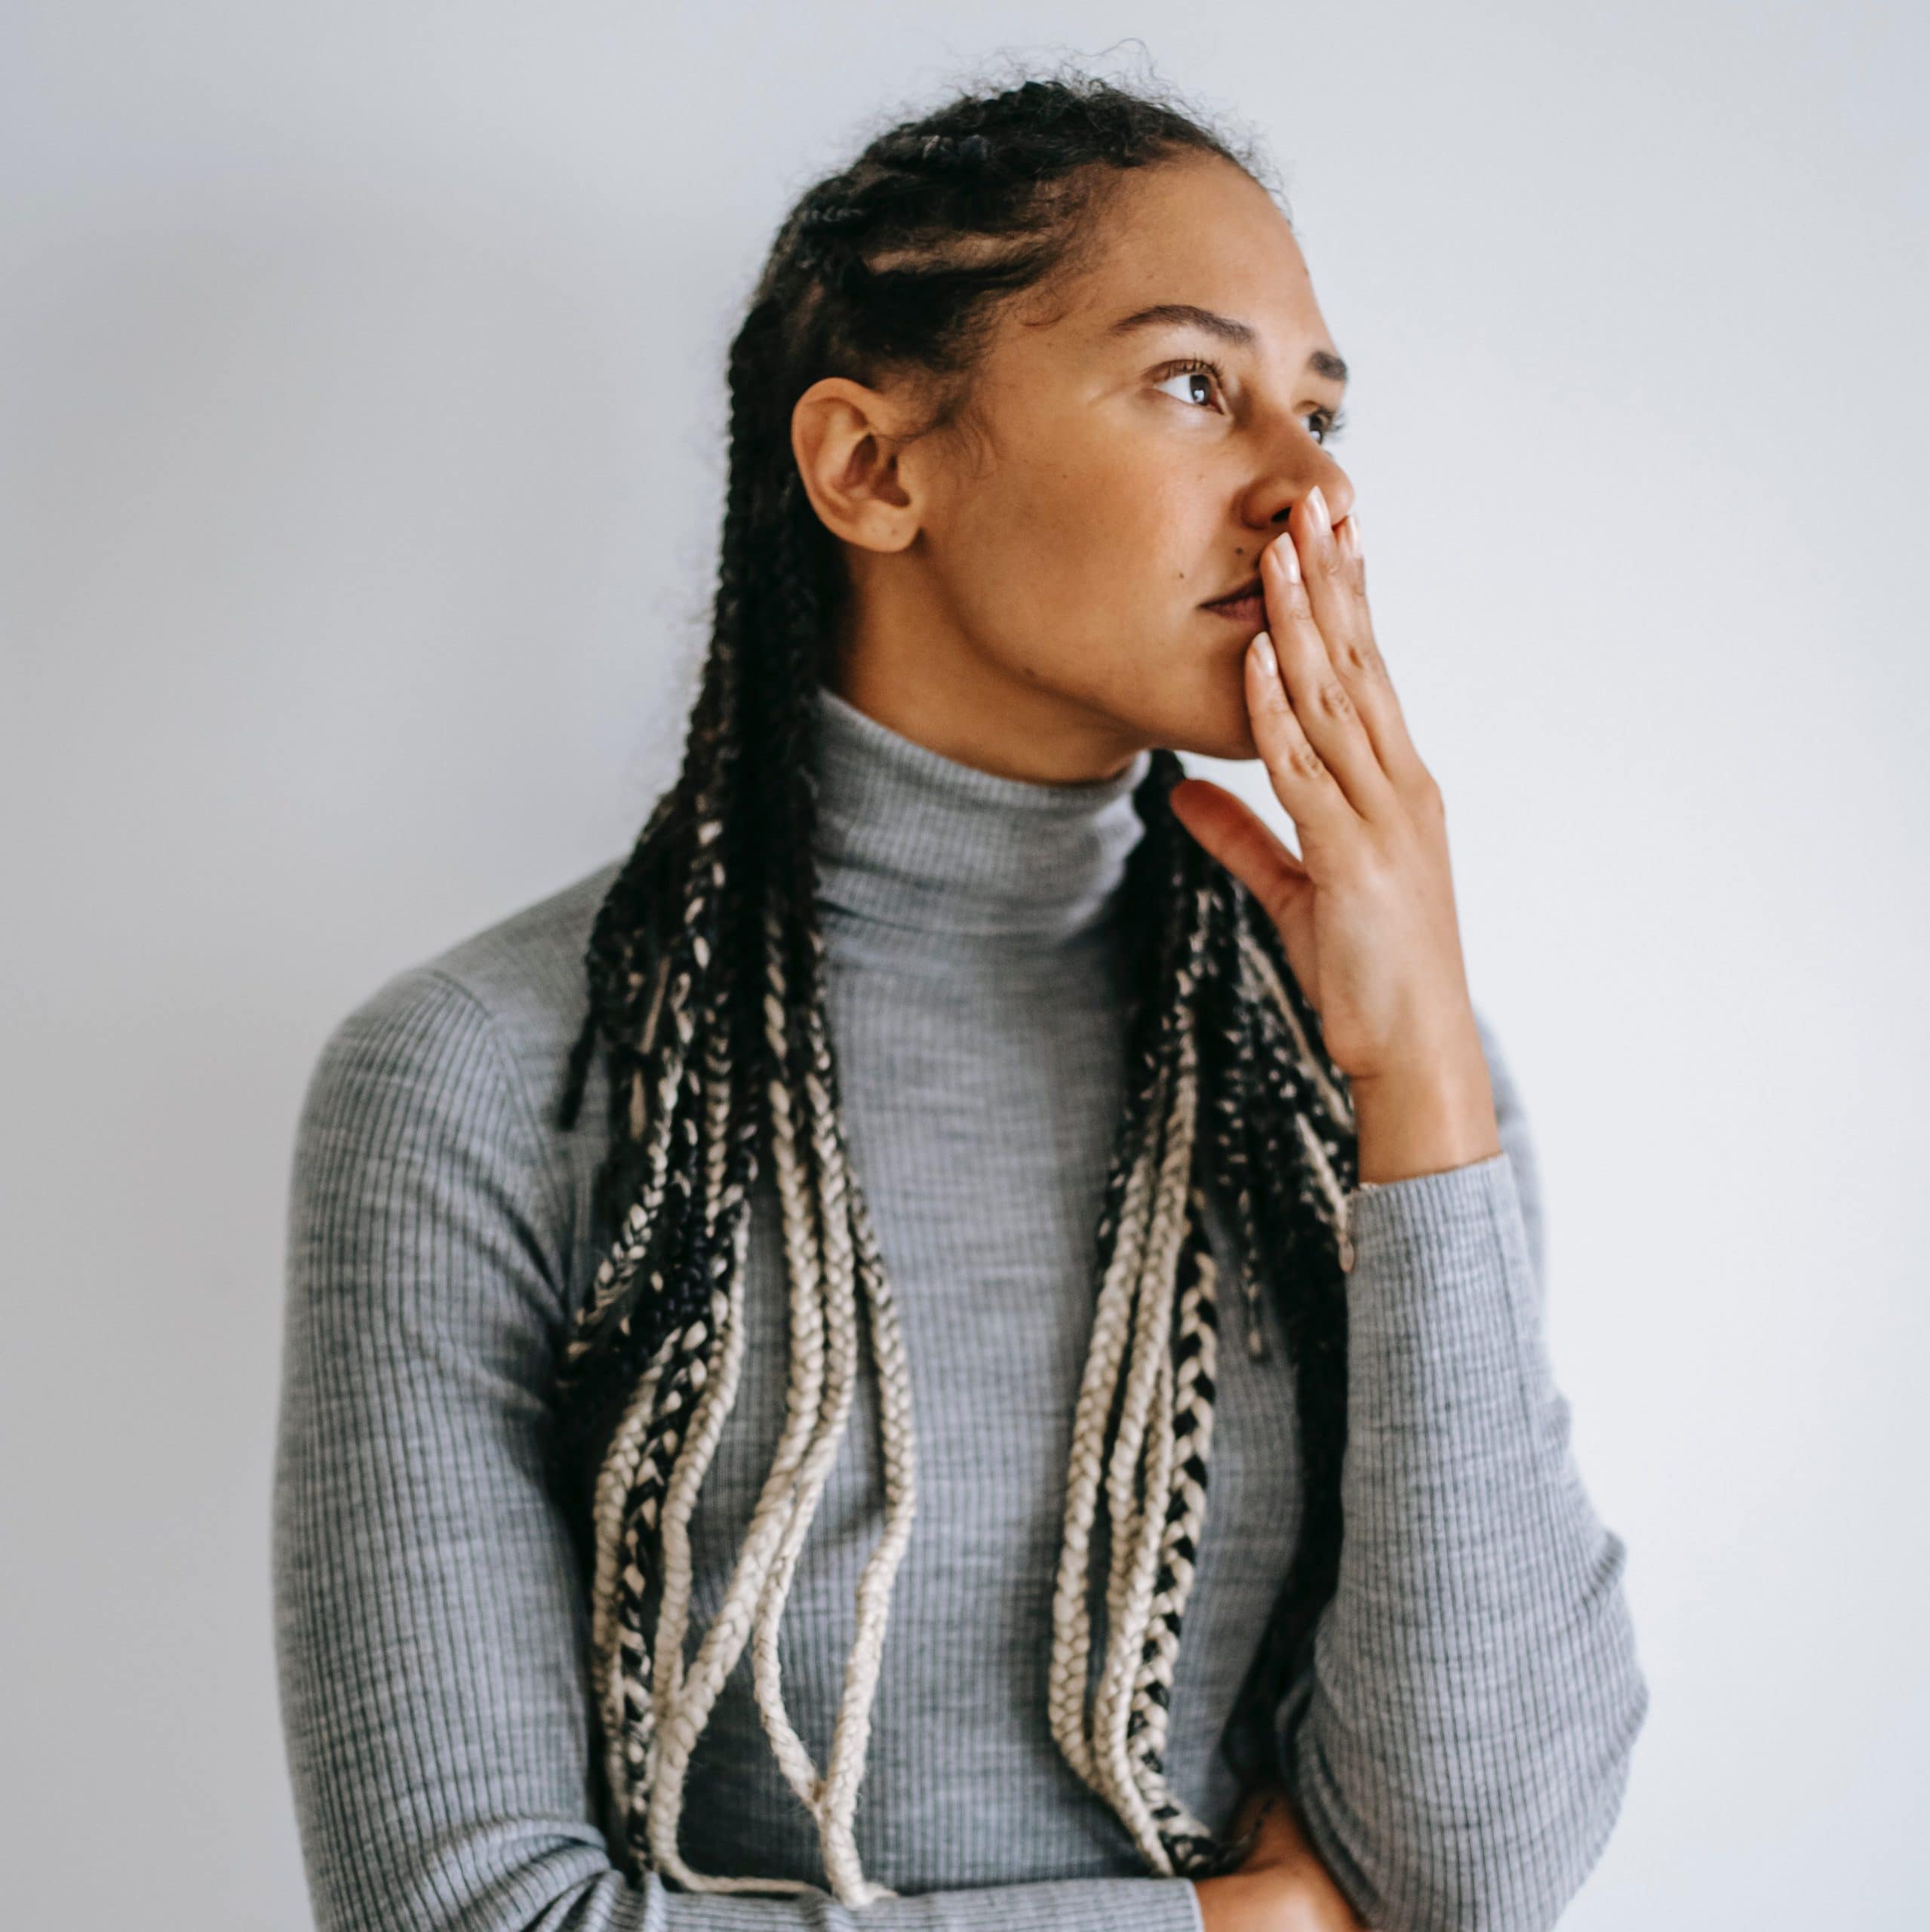 Anxiety can be soothed with sensory based practices. A woman with brown skin and long white-tipped braids anxiously touches her mouth while wearing a gray turtleneck sweater.